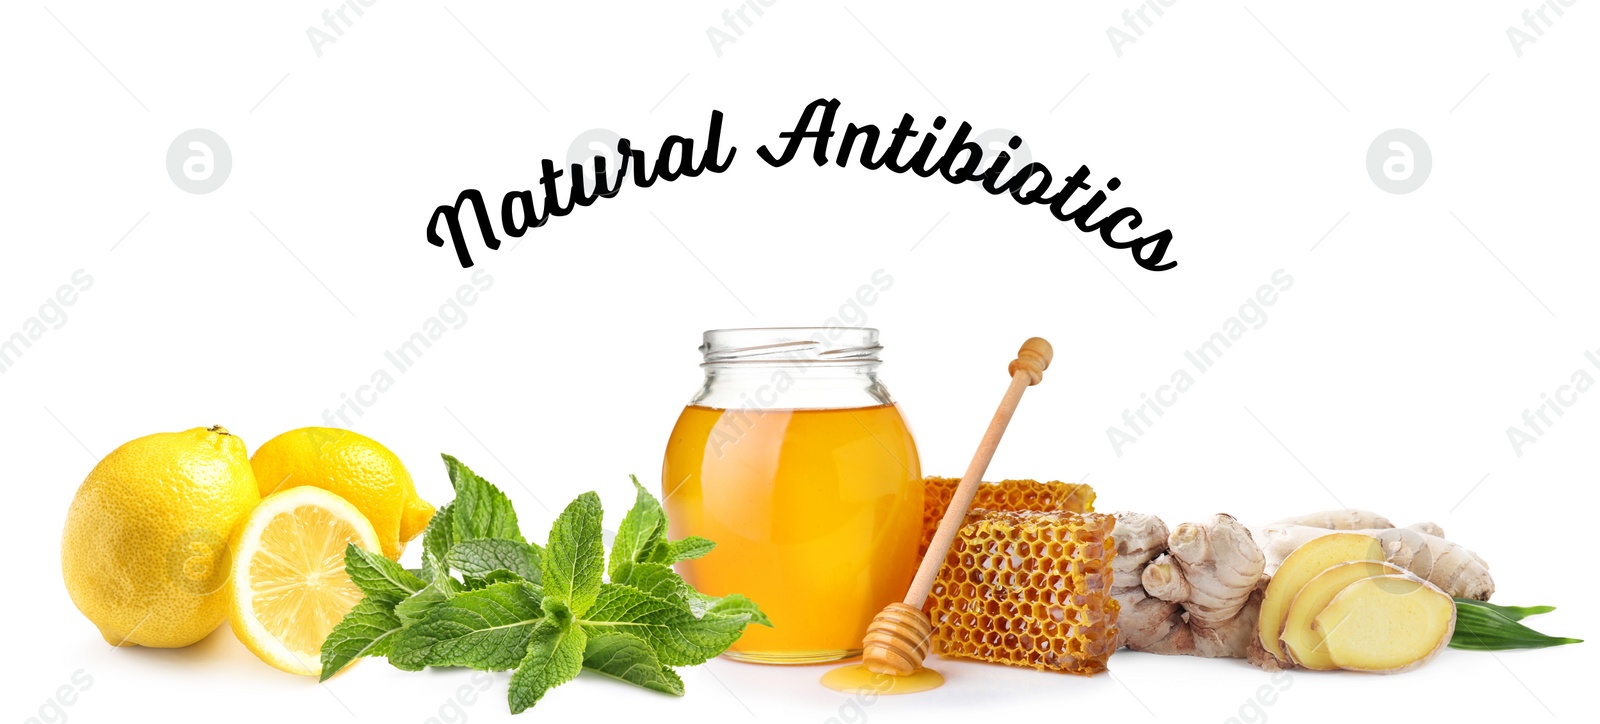 Image of Set of fresh products and text Natural Antibiotics isolated on white. Banner design